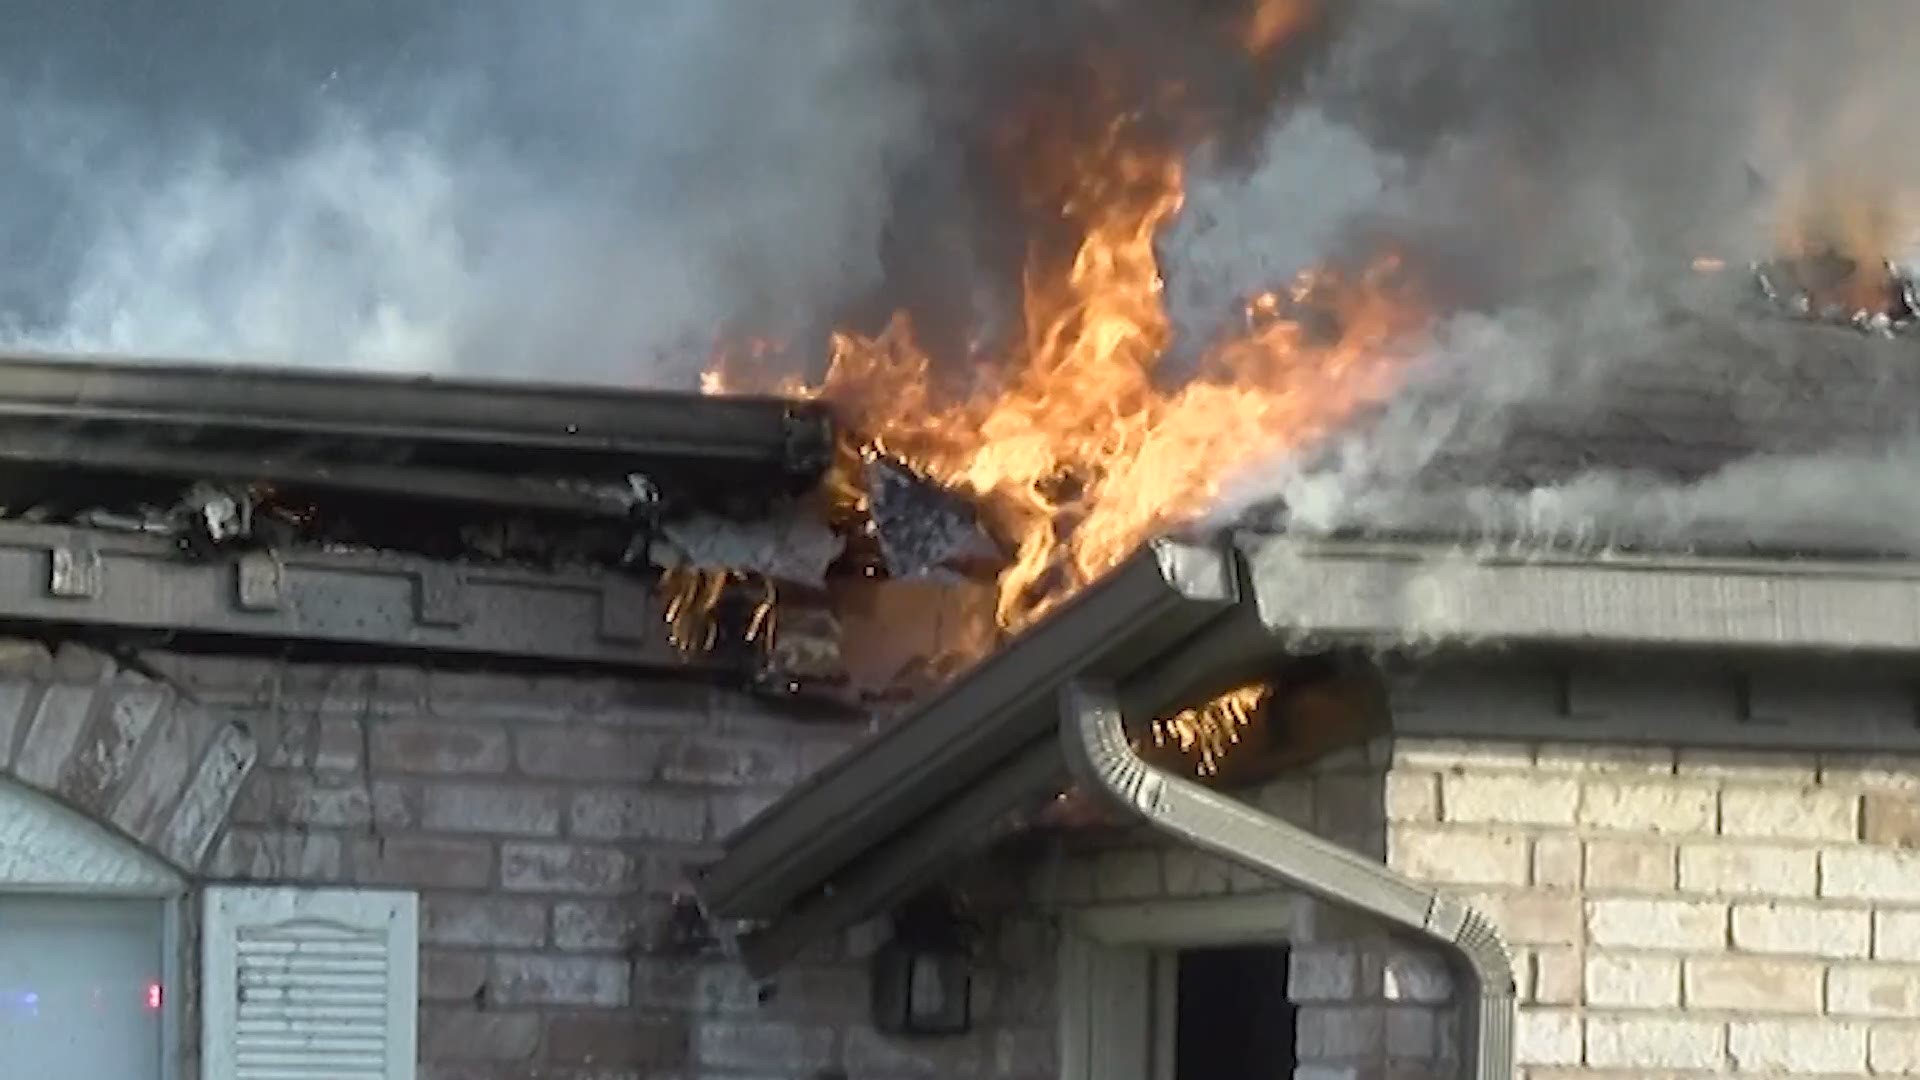 Fire damages townhome complex in Willis, TX